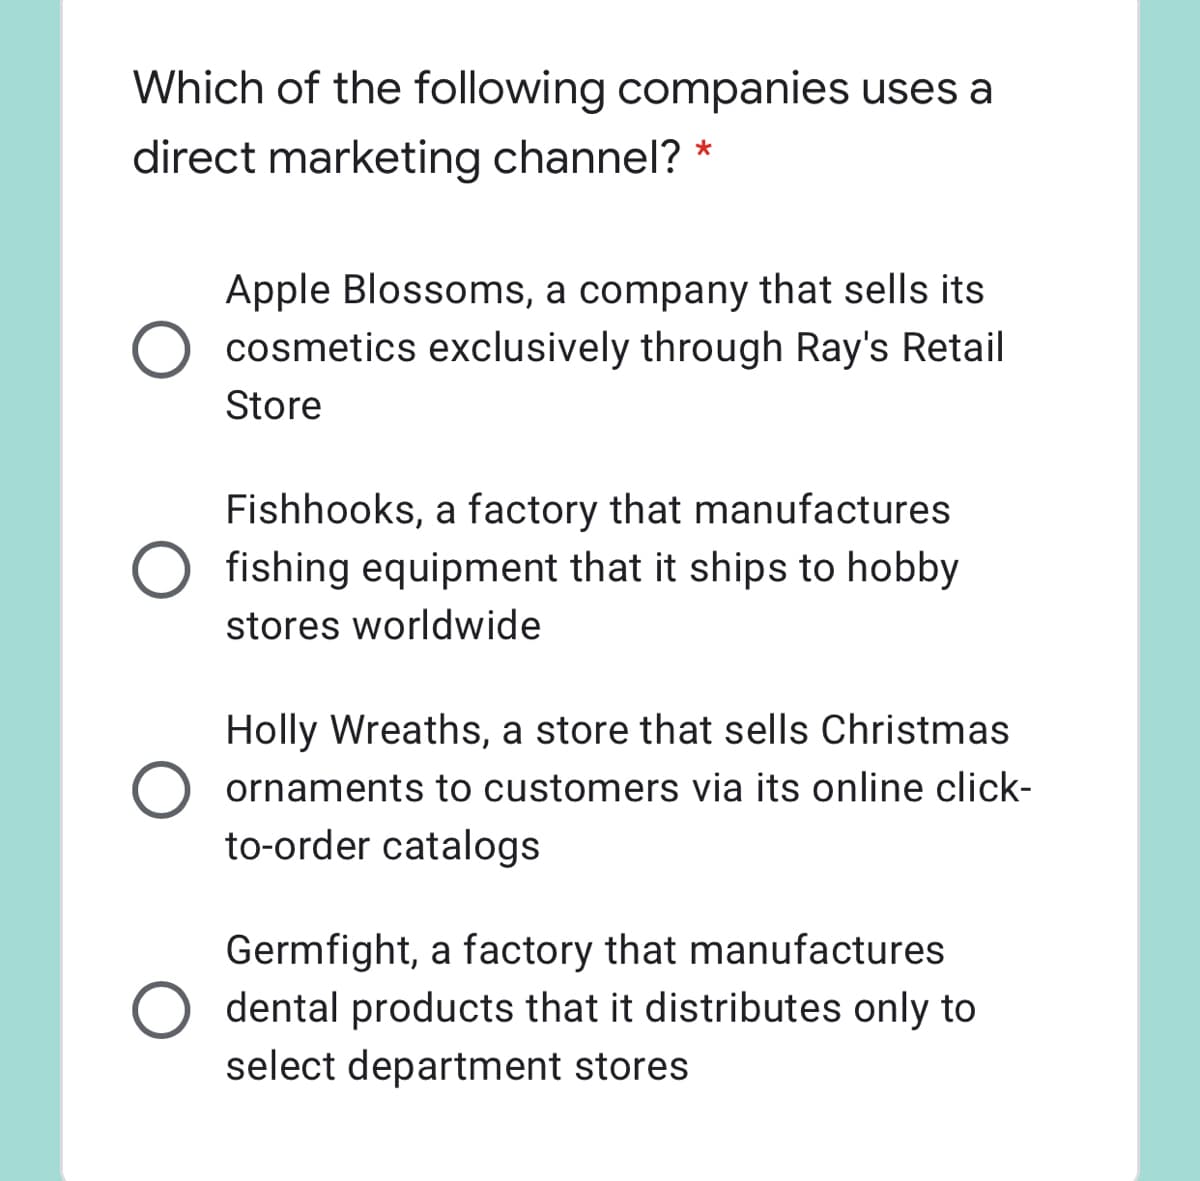 Which of the following companies uses a
direct marketing channel?
Apple Blossoms, a company that sells its
O cosmetics exclusively through Ray's Retail
Store
Fishhooks, a factory that manufactures
O fishing equipment that it ships to hobby
stores worldwide
Holly Wreaths, a store that sells Christmas
ornaments to customers via its online click-
to-order catalogs
Germfight, a factory that manufactures
dental products that it distributes only to
select department stores
